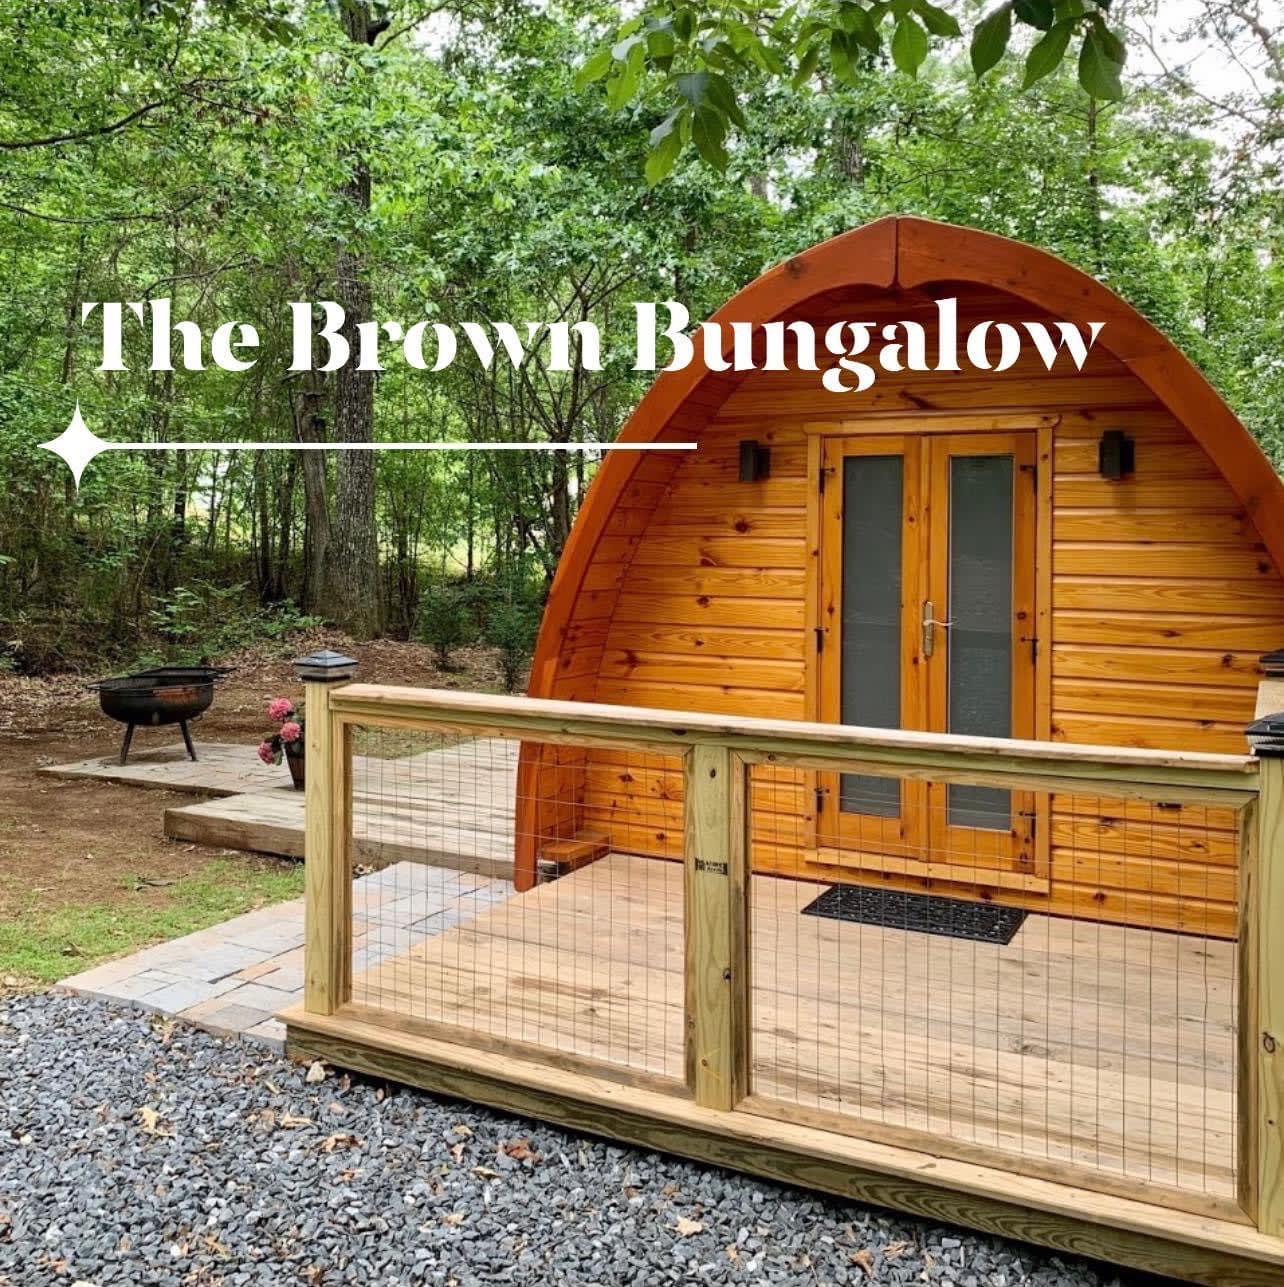 The Brown Bungalow